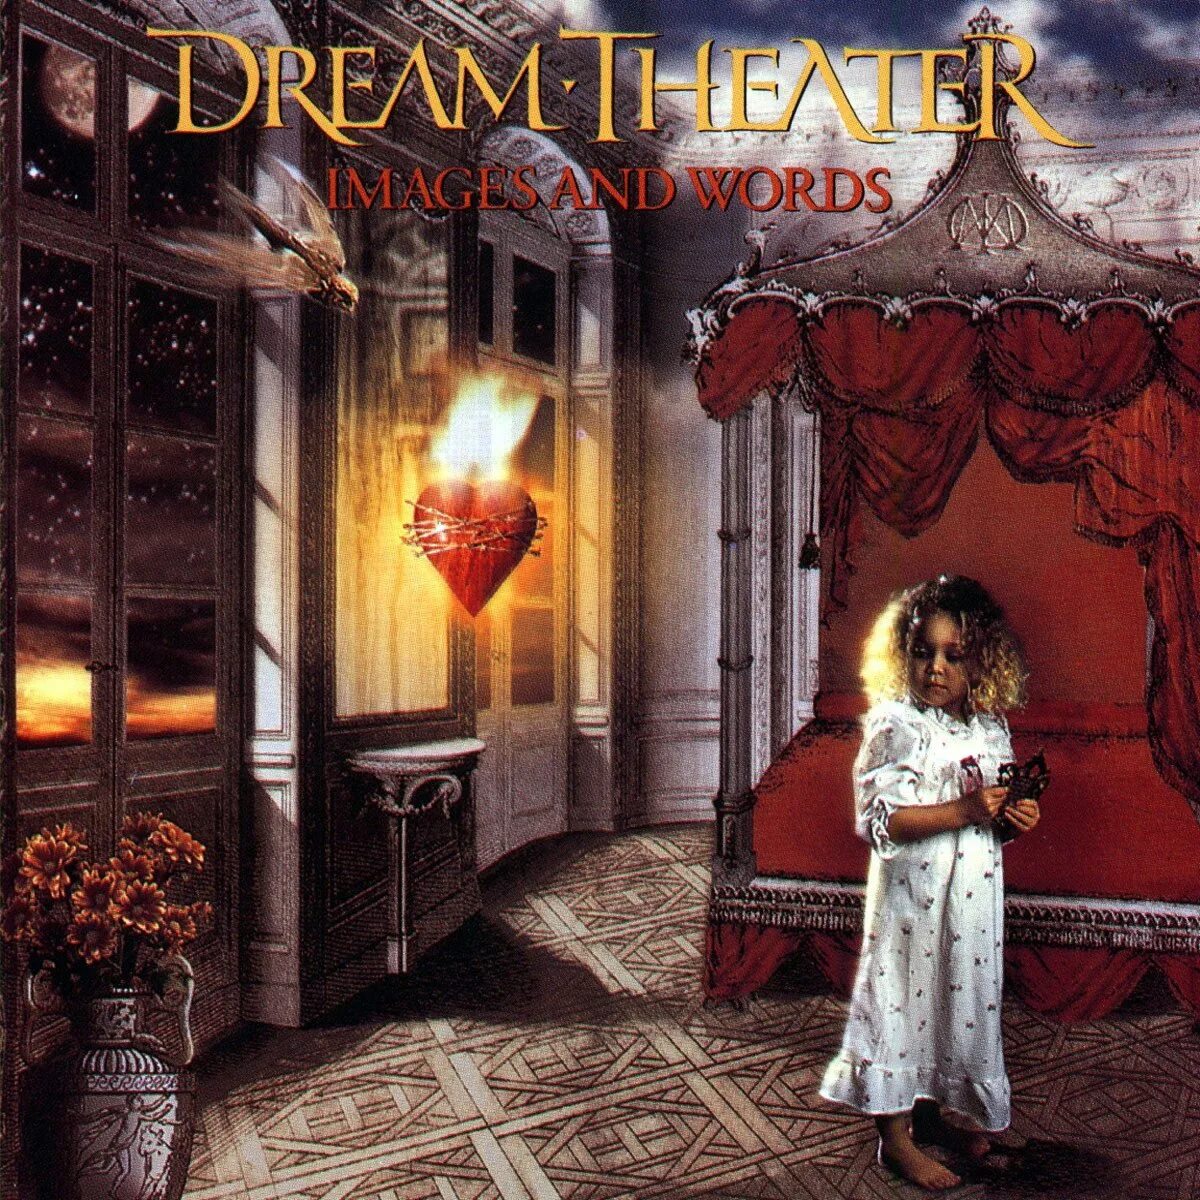 Dream Theater images and Words 1992. Dream Theater обложки альбомов. Dream Theater images and Words. Word image.